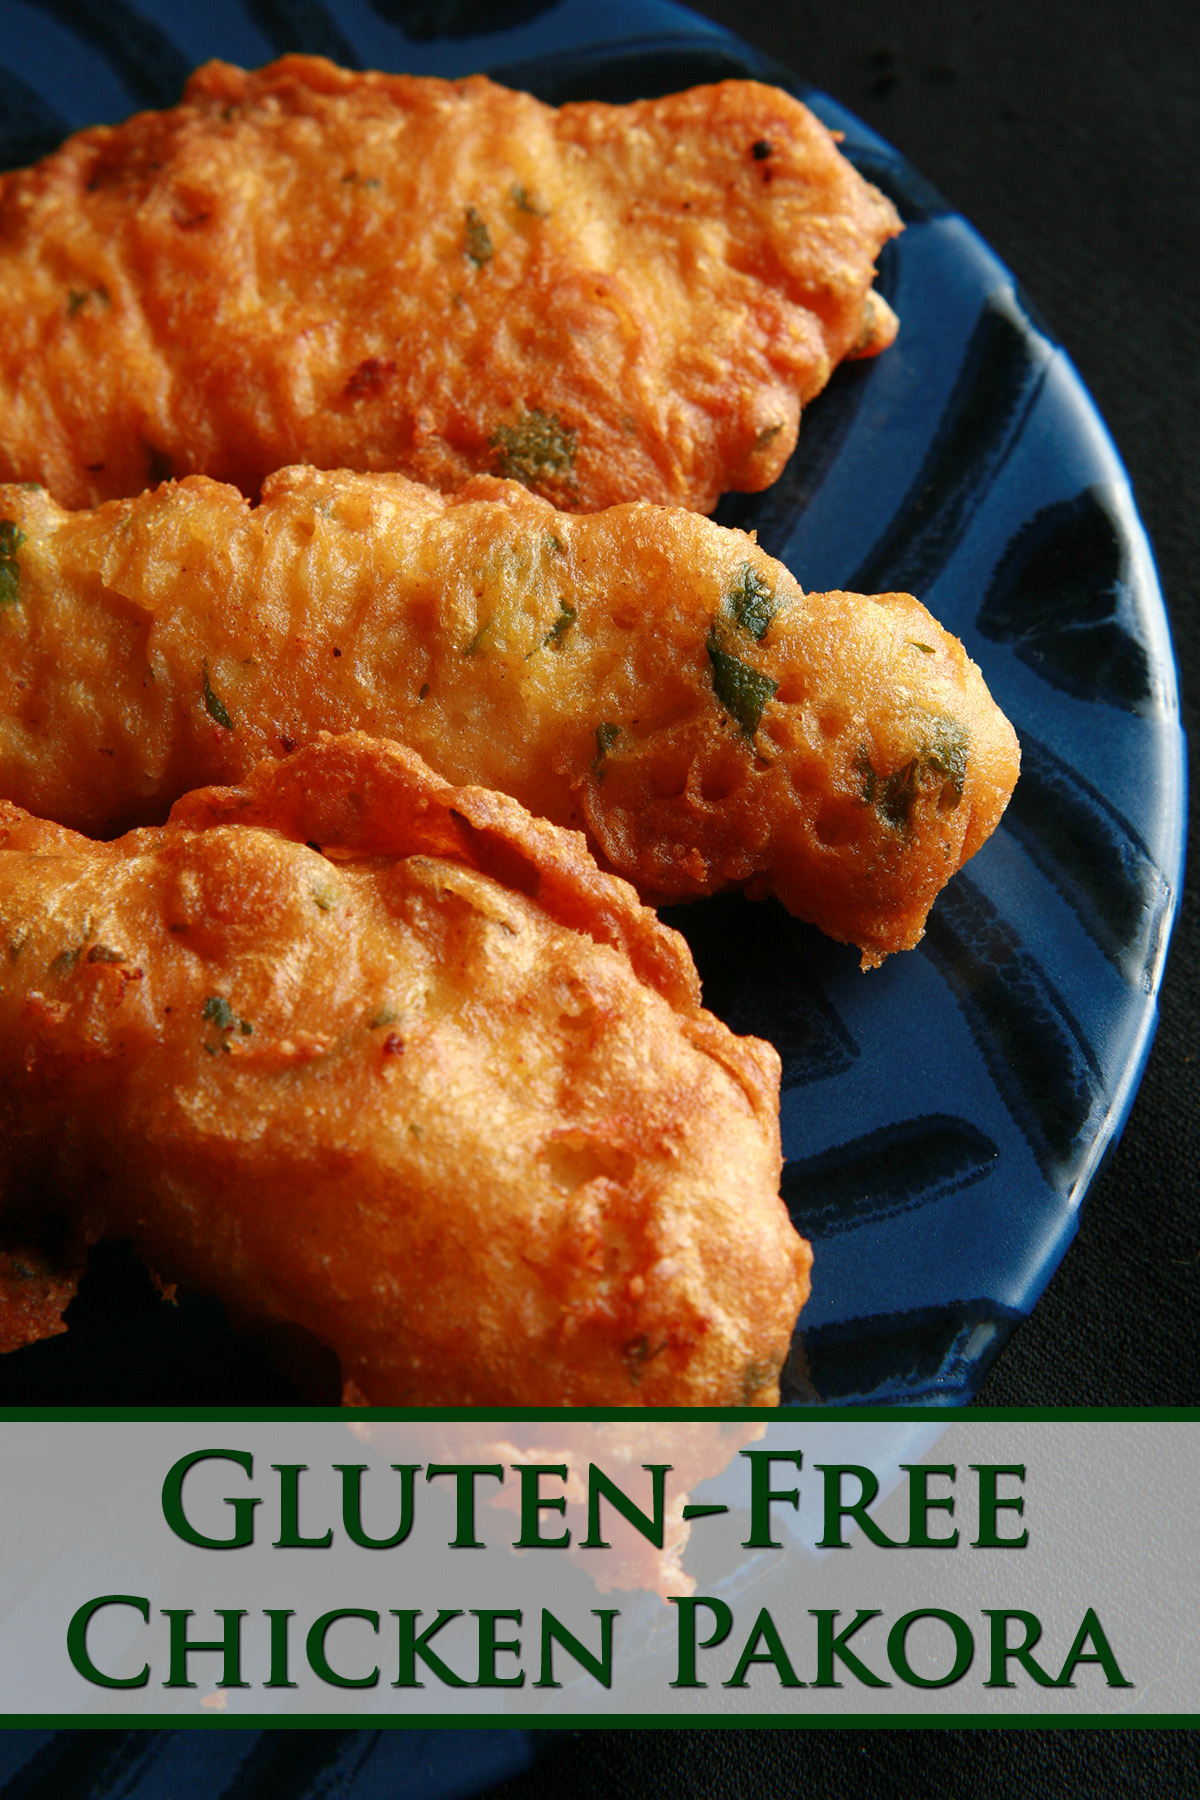 Several strips of gluten-free chicken pakora on a blue plate. They are golden deep fried, with flecks of green cilantro.